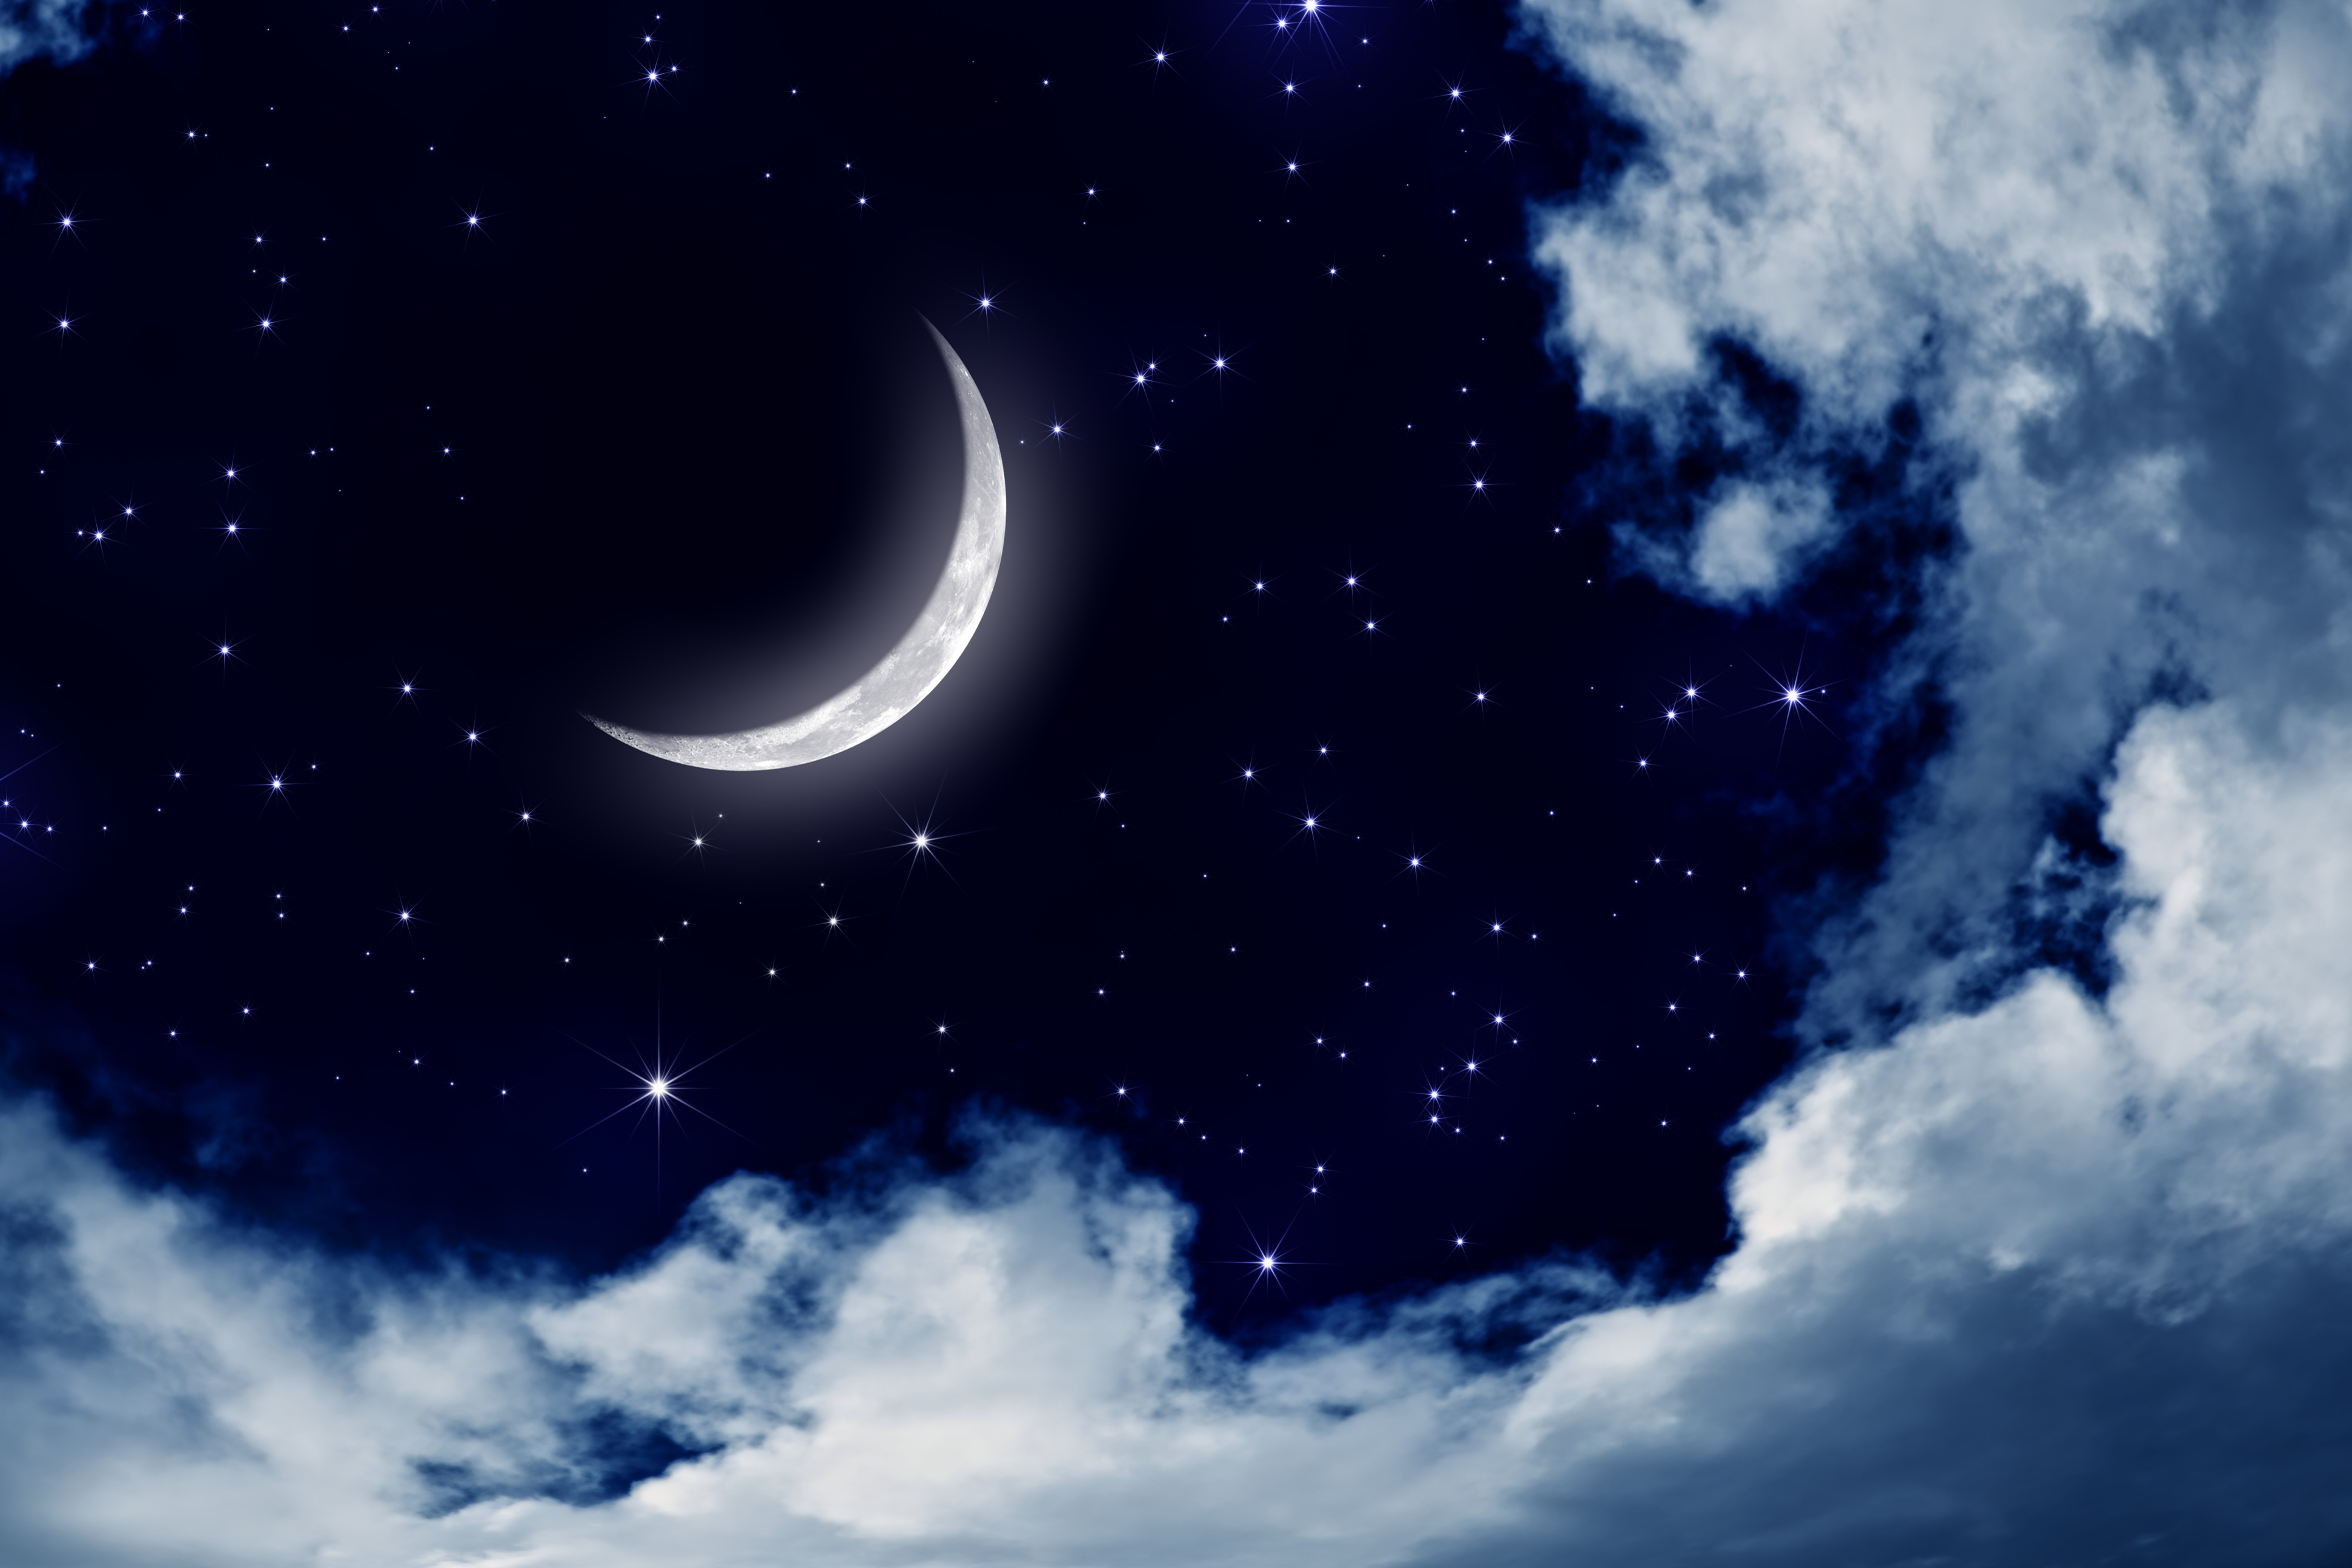  moon night nature landscape clouds stars sky wallpaper background